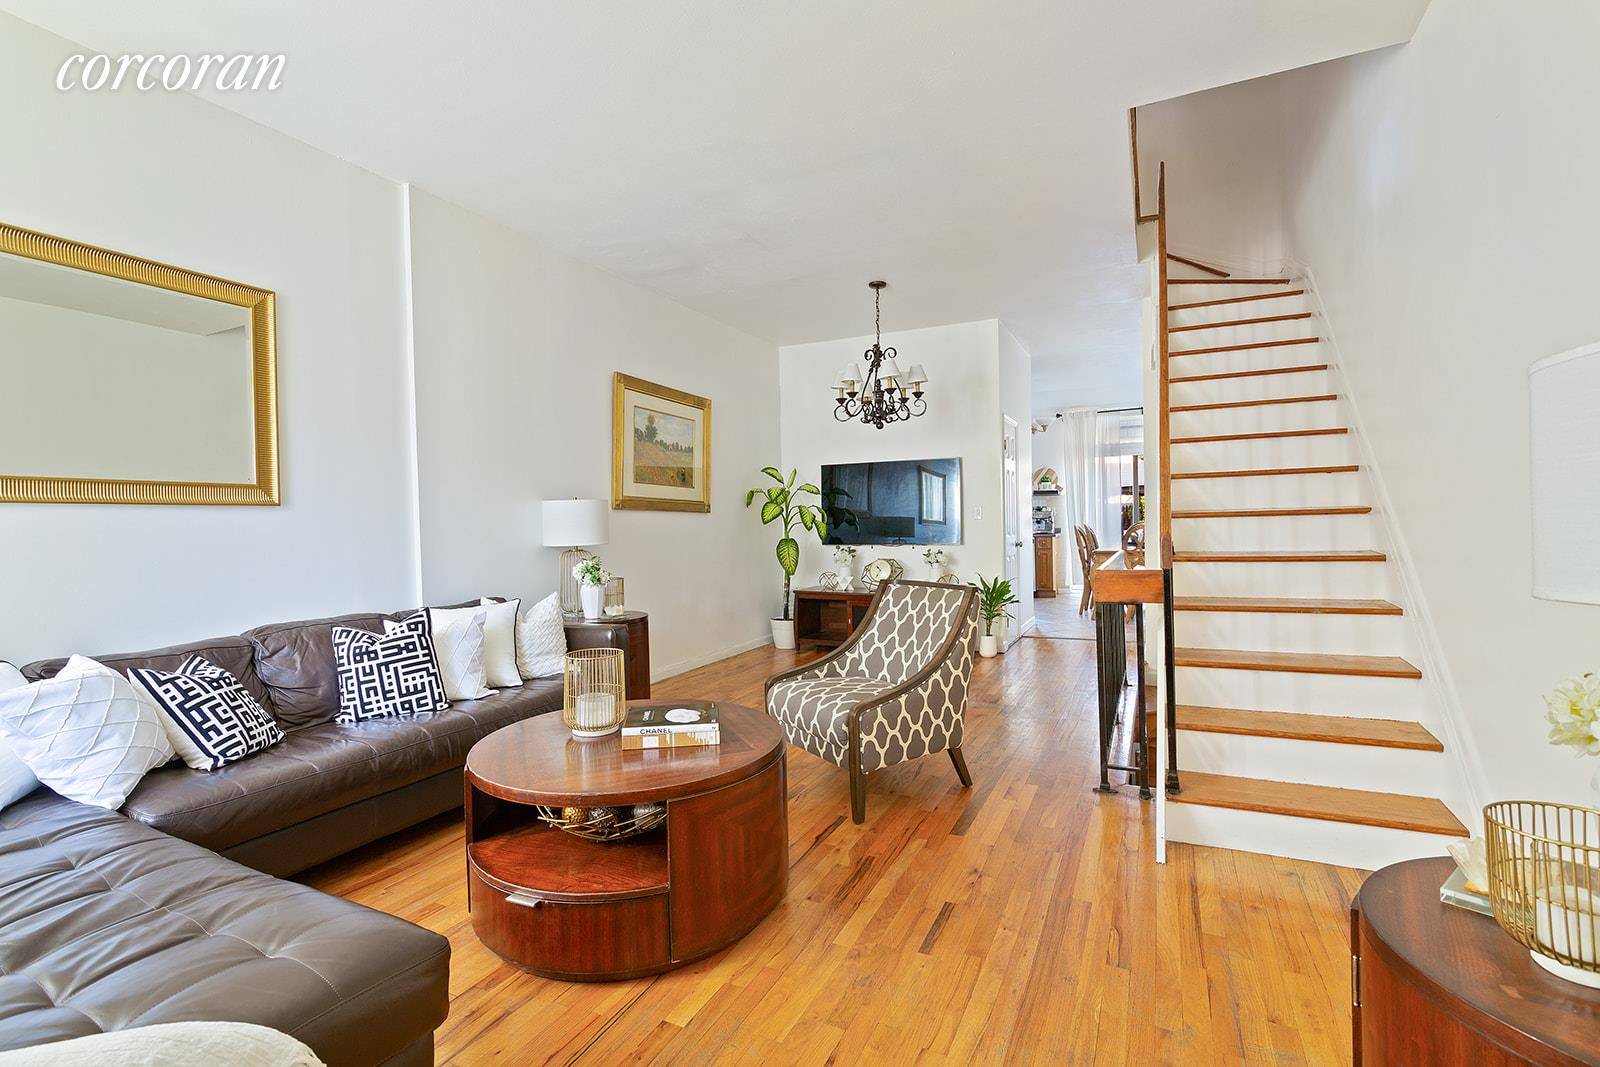 183 33rd Street, is a modern, thoughtfully built home in Greenwood Heights with 3 large bedrooms and 1.